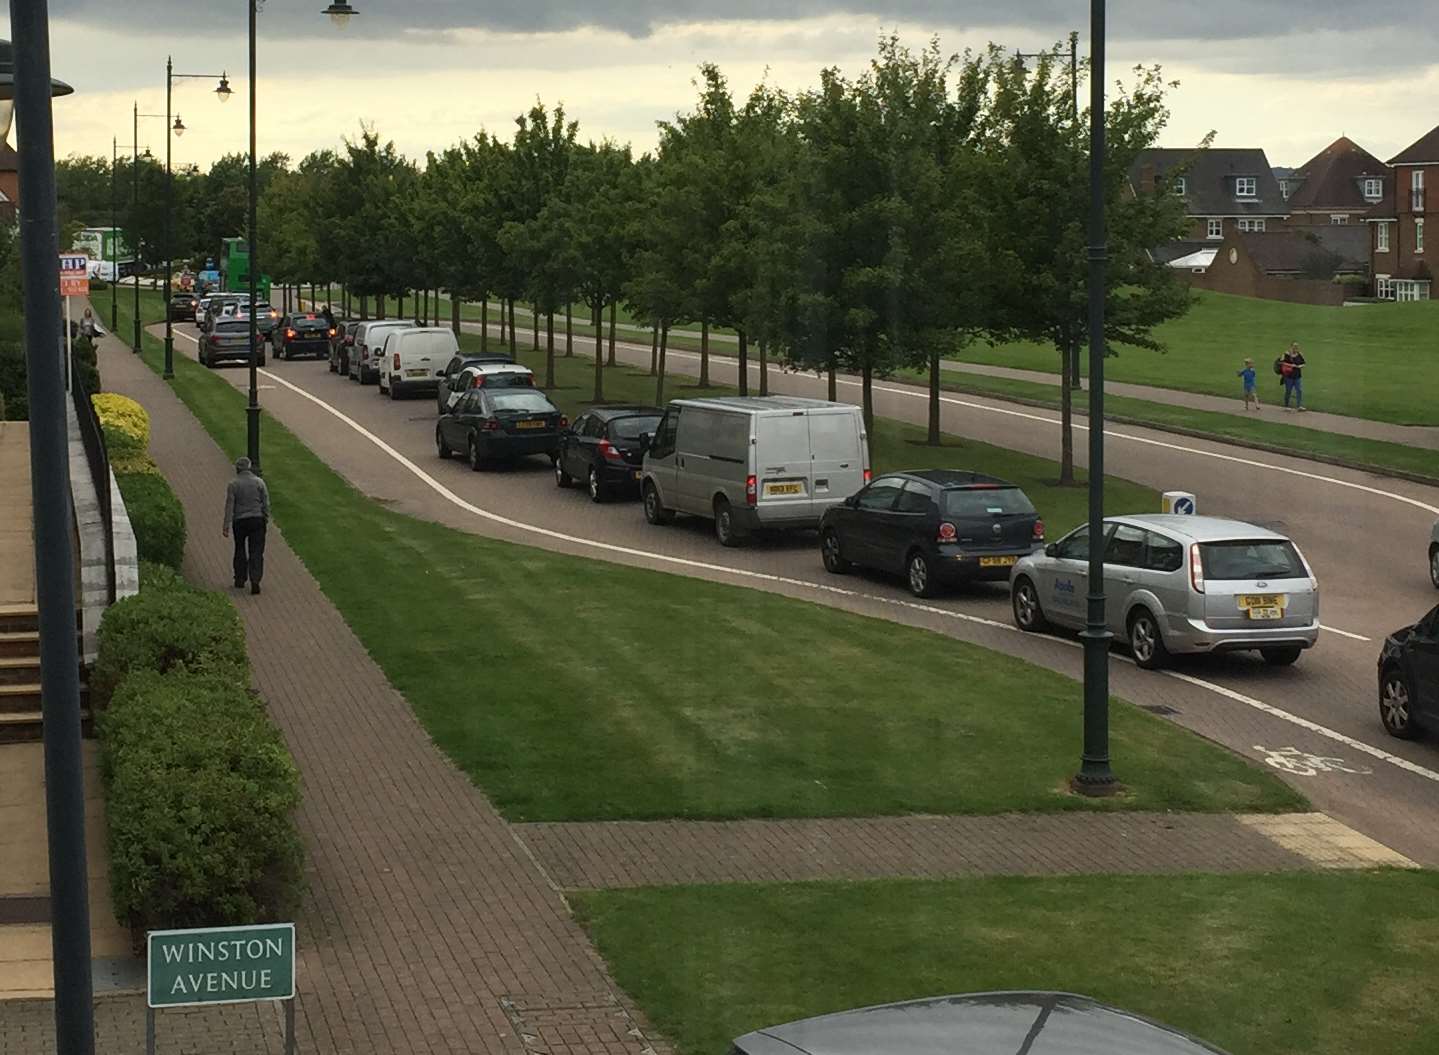 A picture taken from Winston Avenue shows traffic backed up